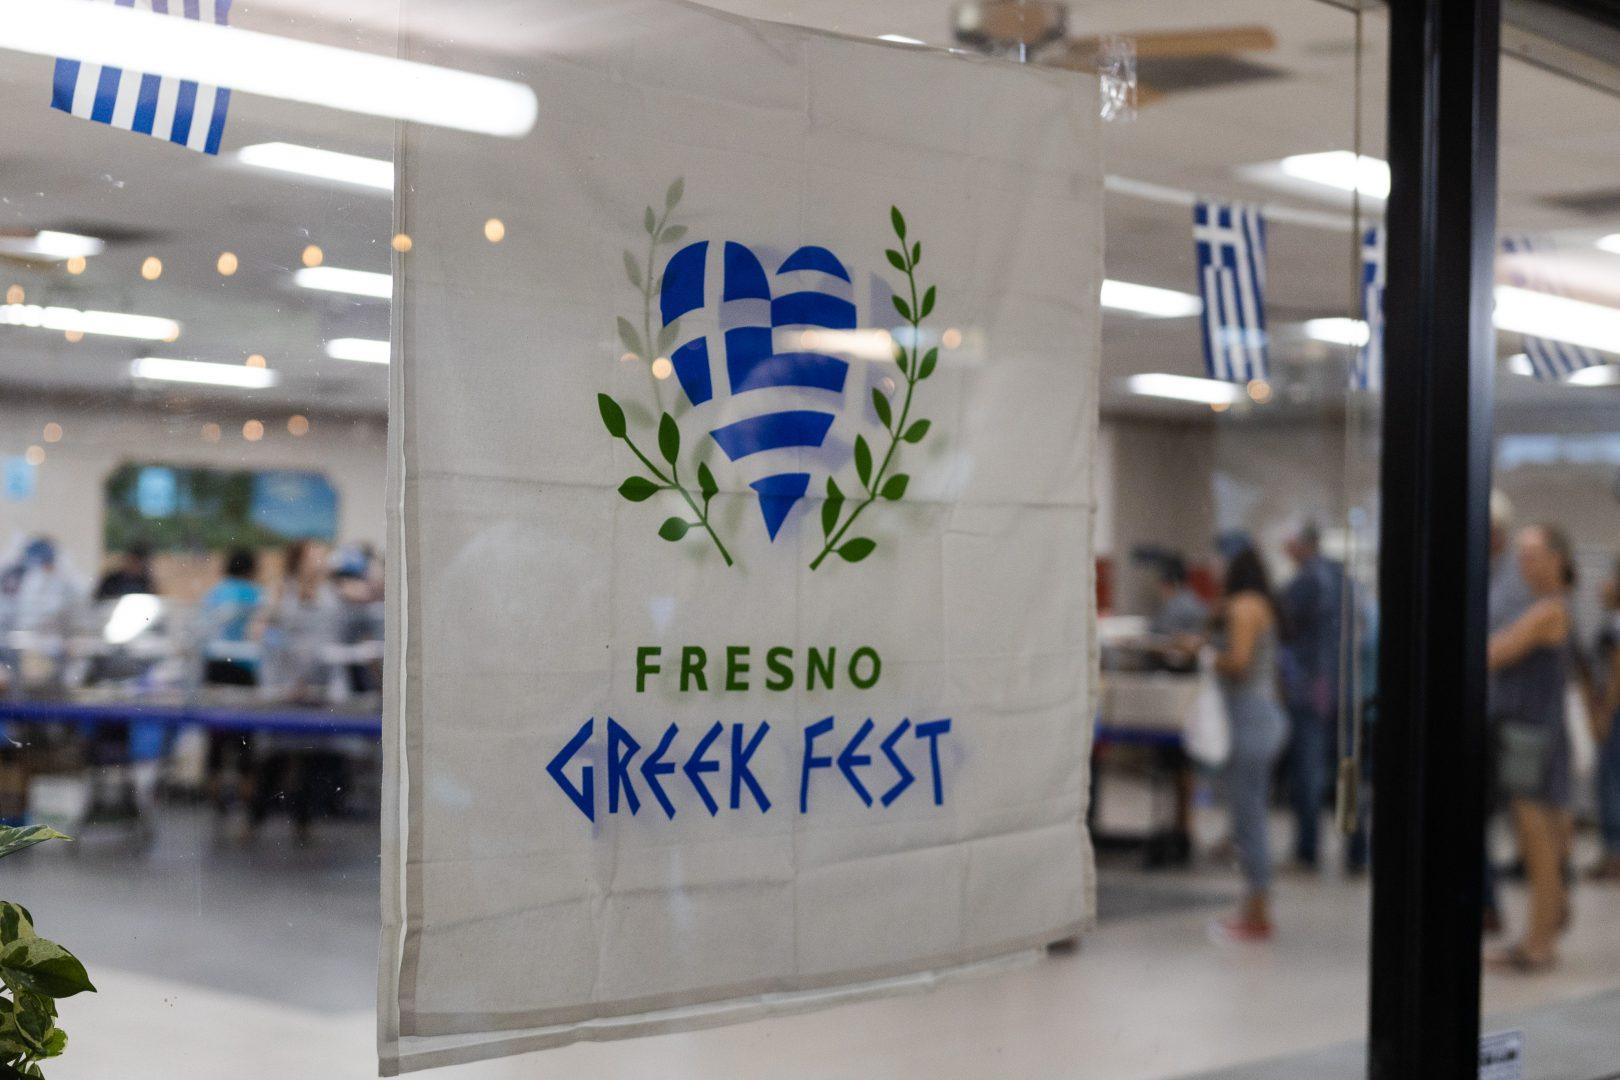 The Fresno Greek Fest is open from Friday, Sept. 16 to Sunday, Sept. 18. (Carlos Rene Castro/The Collegian)